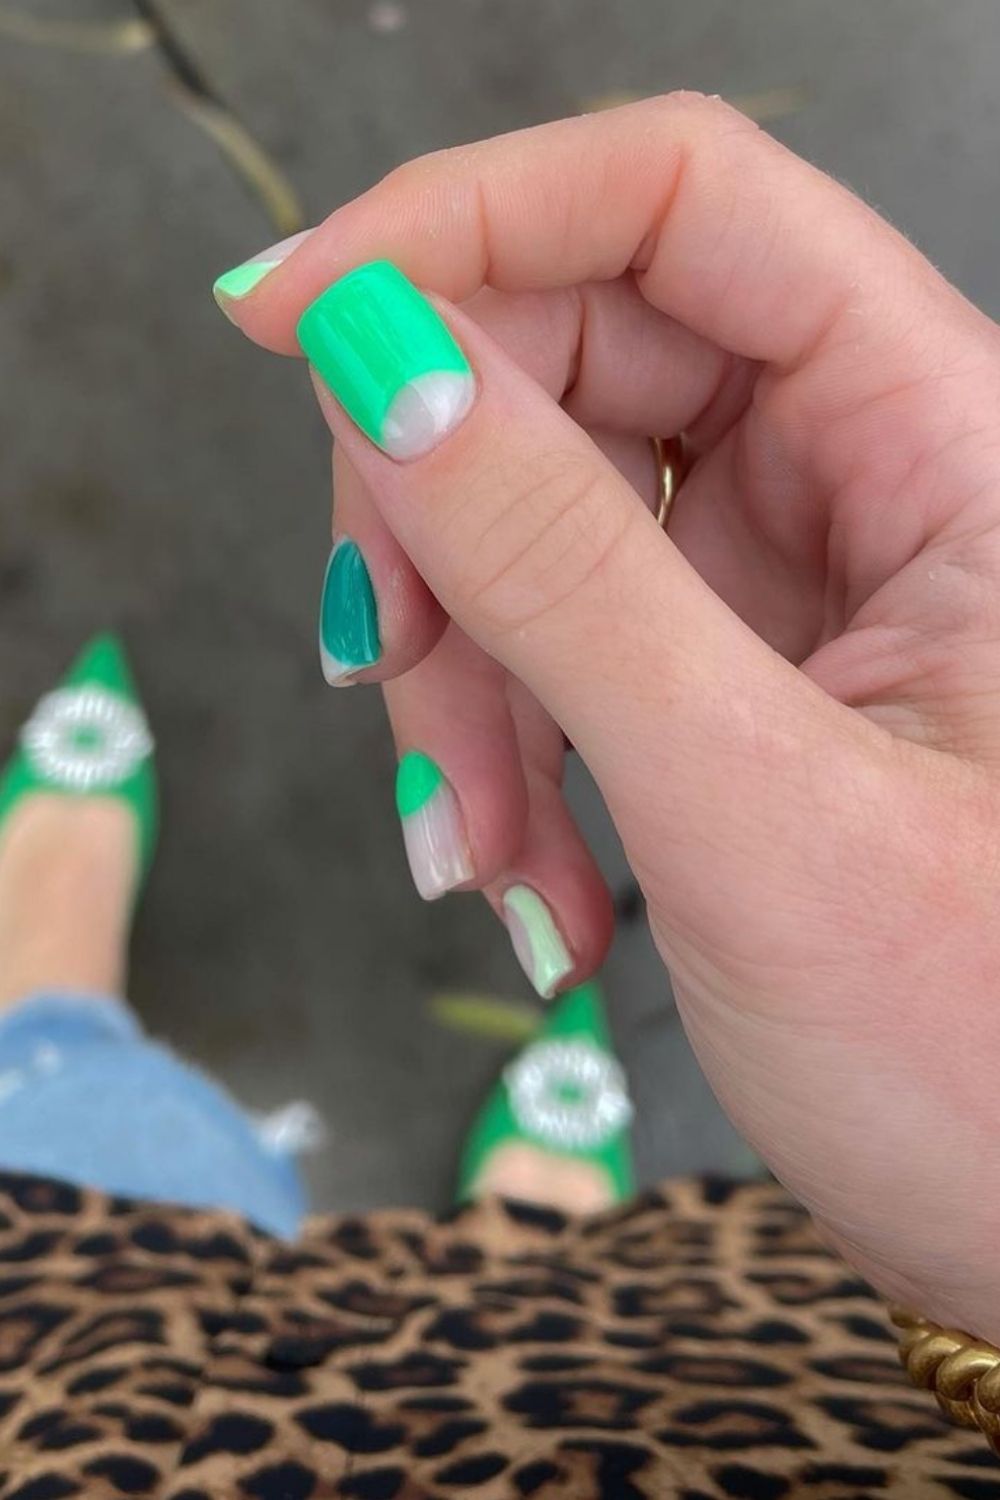 Best Green nail designs to try 2021: neon green, lime green, dark green